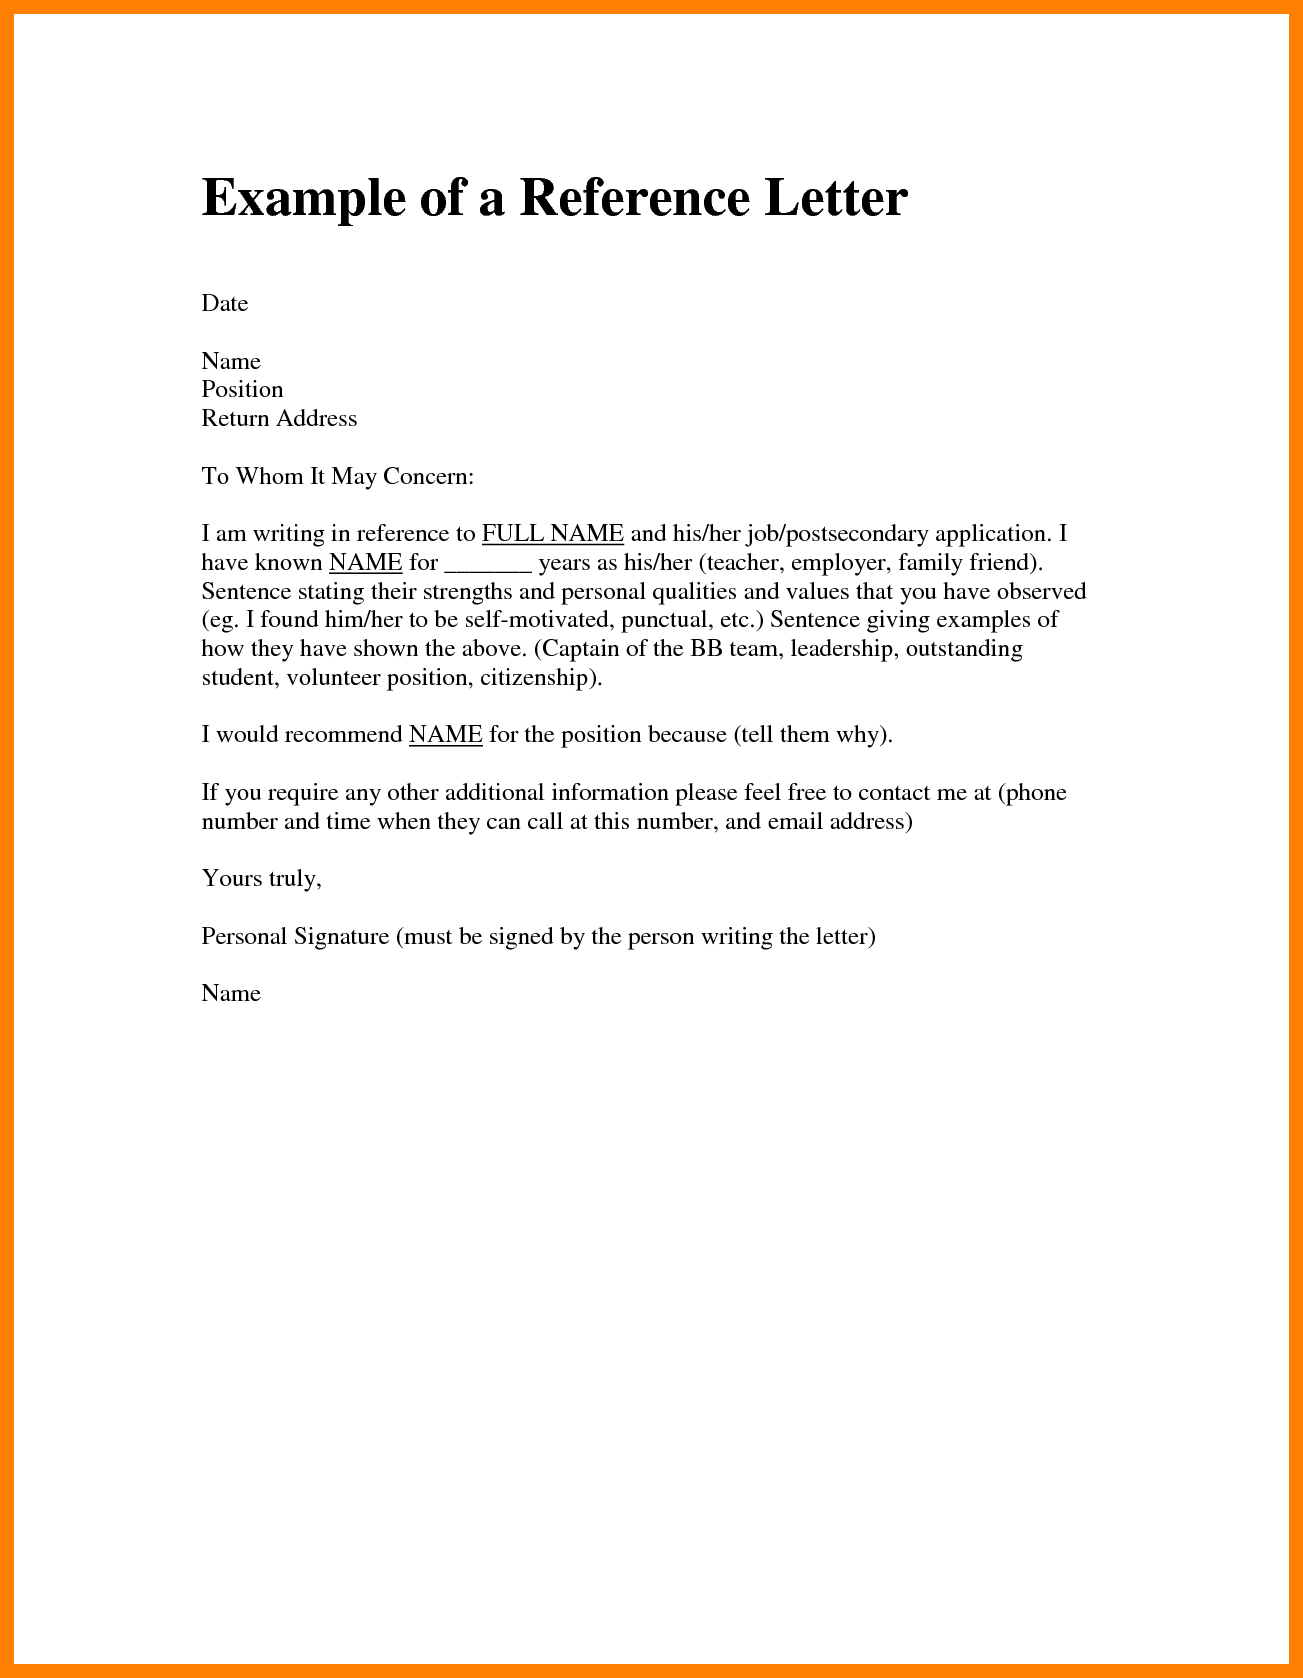 Character Reference Letter For A Friend Writing A inside dimensions 1303 X 1678